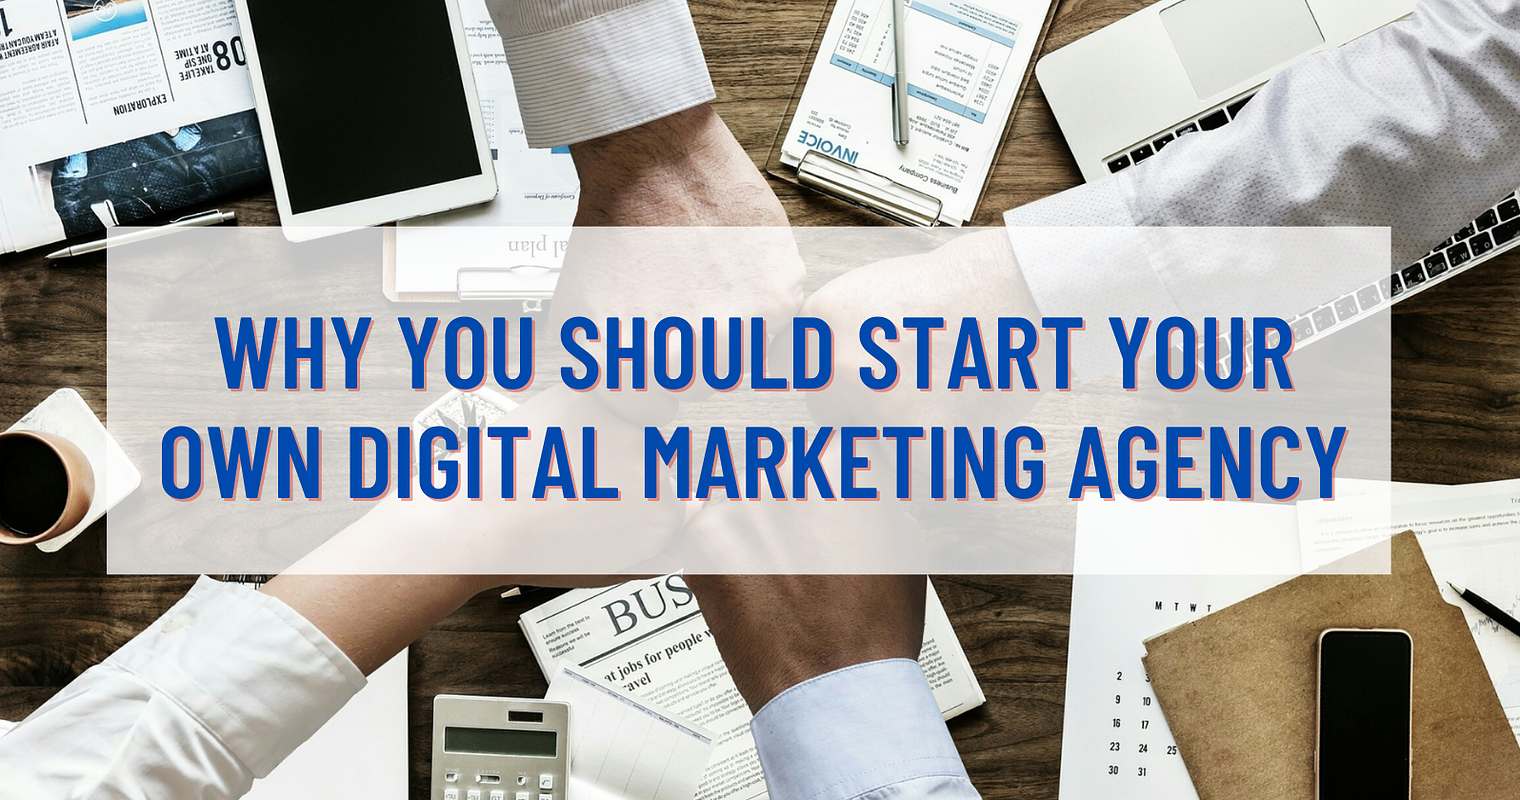 Why You Should Start Your Own Digital Marketing Agency